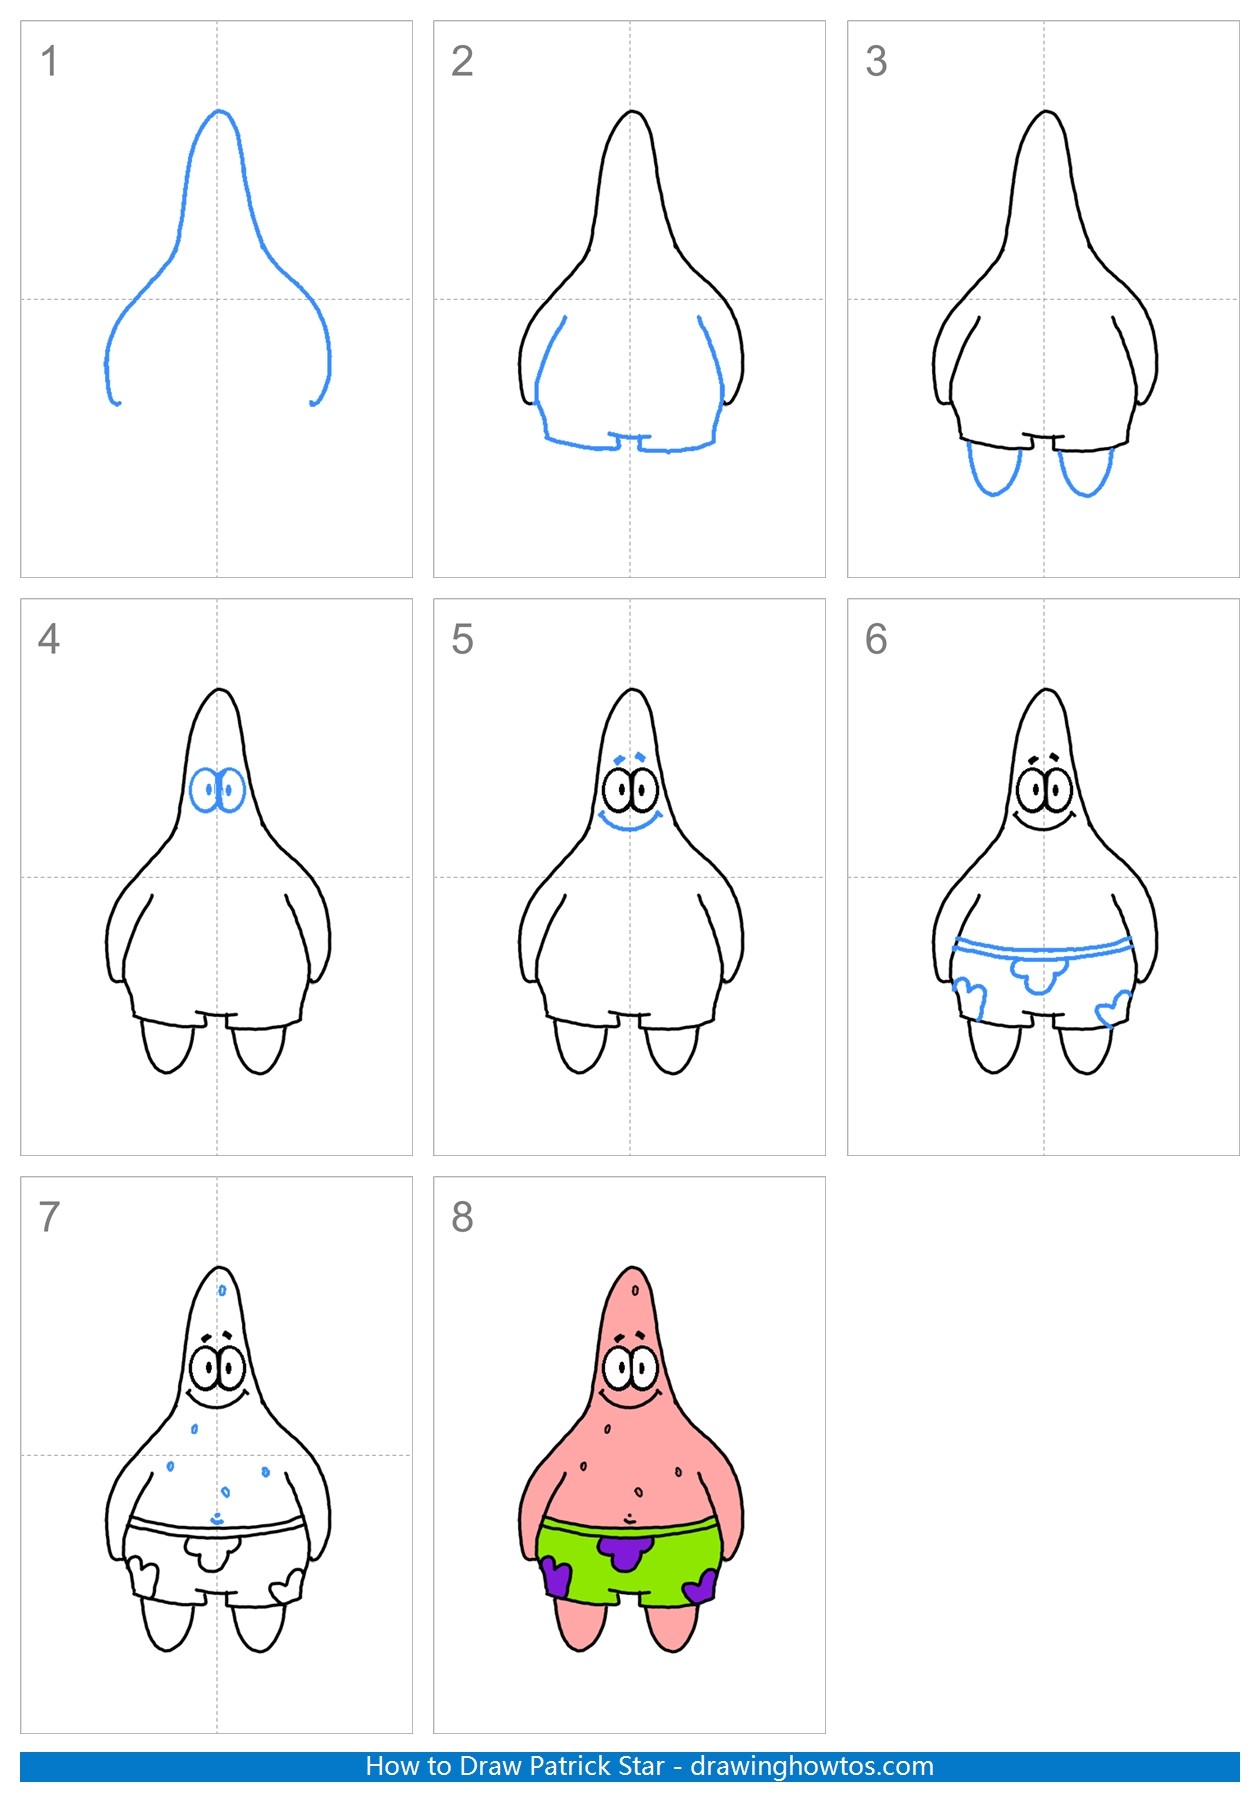 How to Draw Patrick Star Step by Step